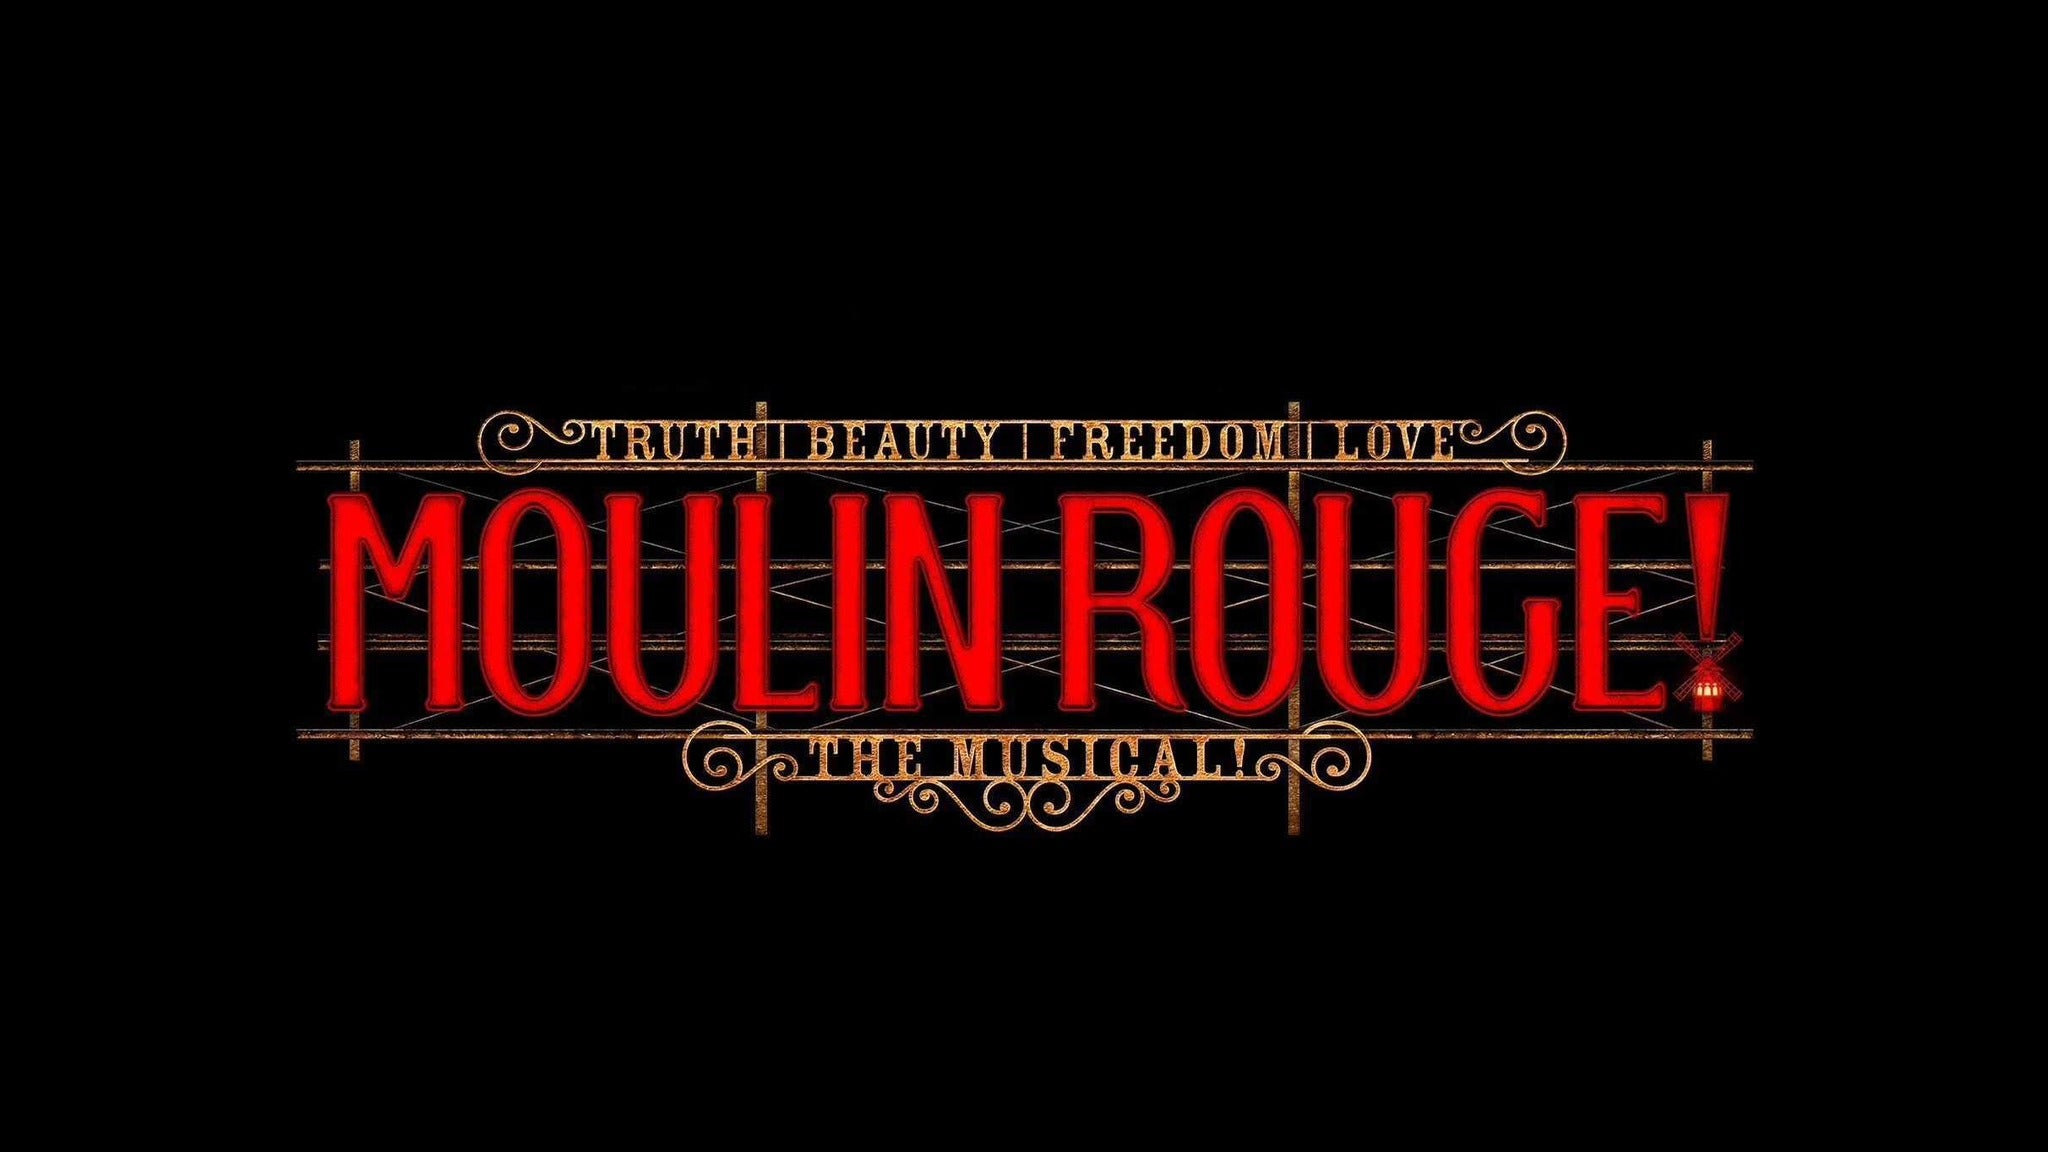 Moulin Rouge! The Musical at Orpheum Theatre